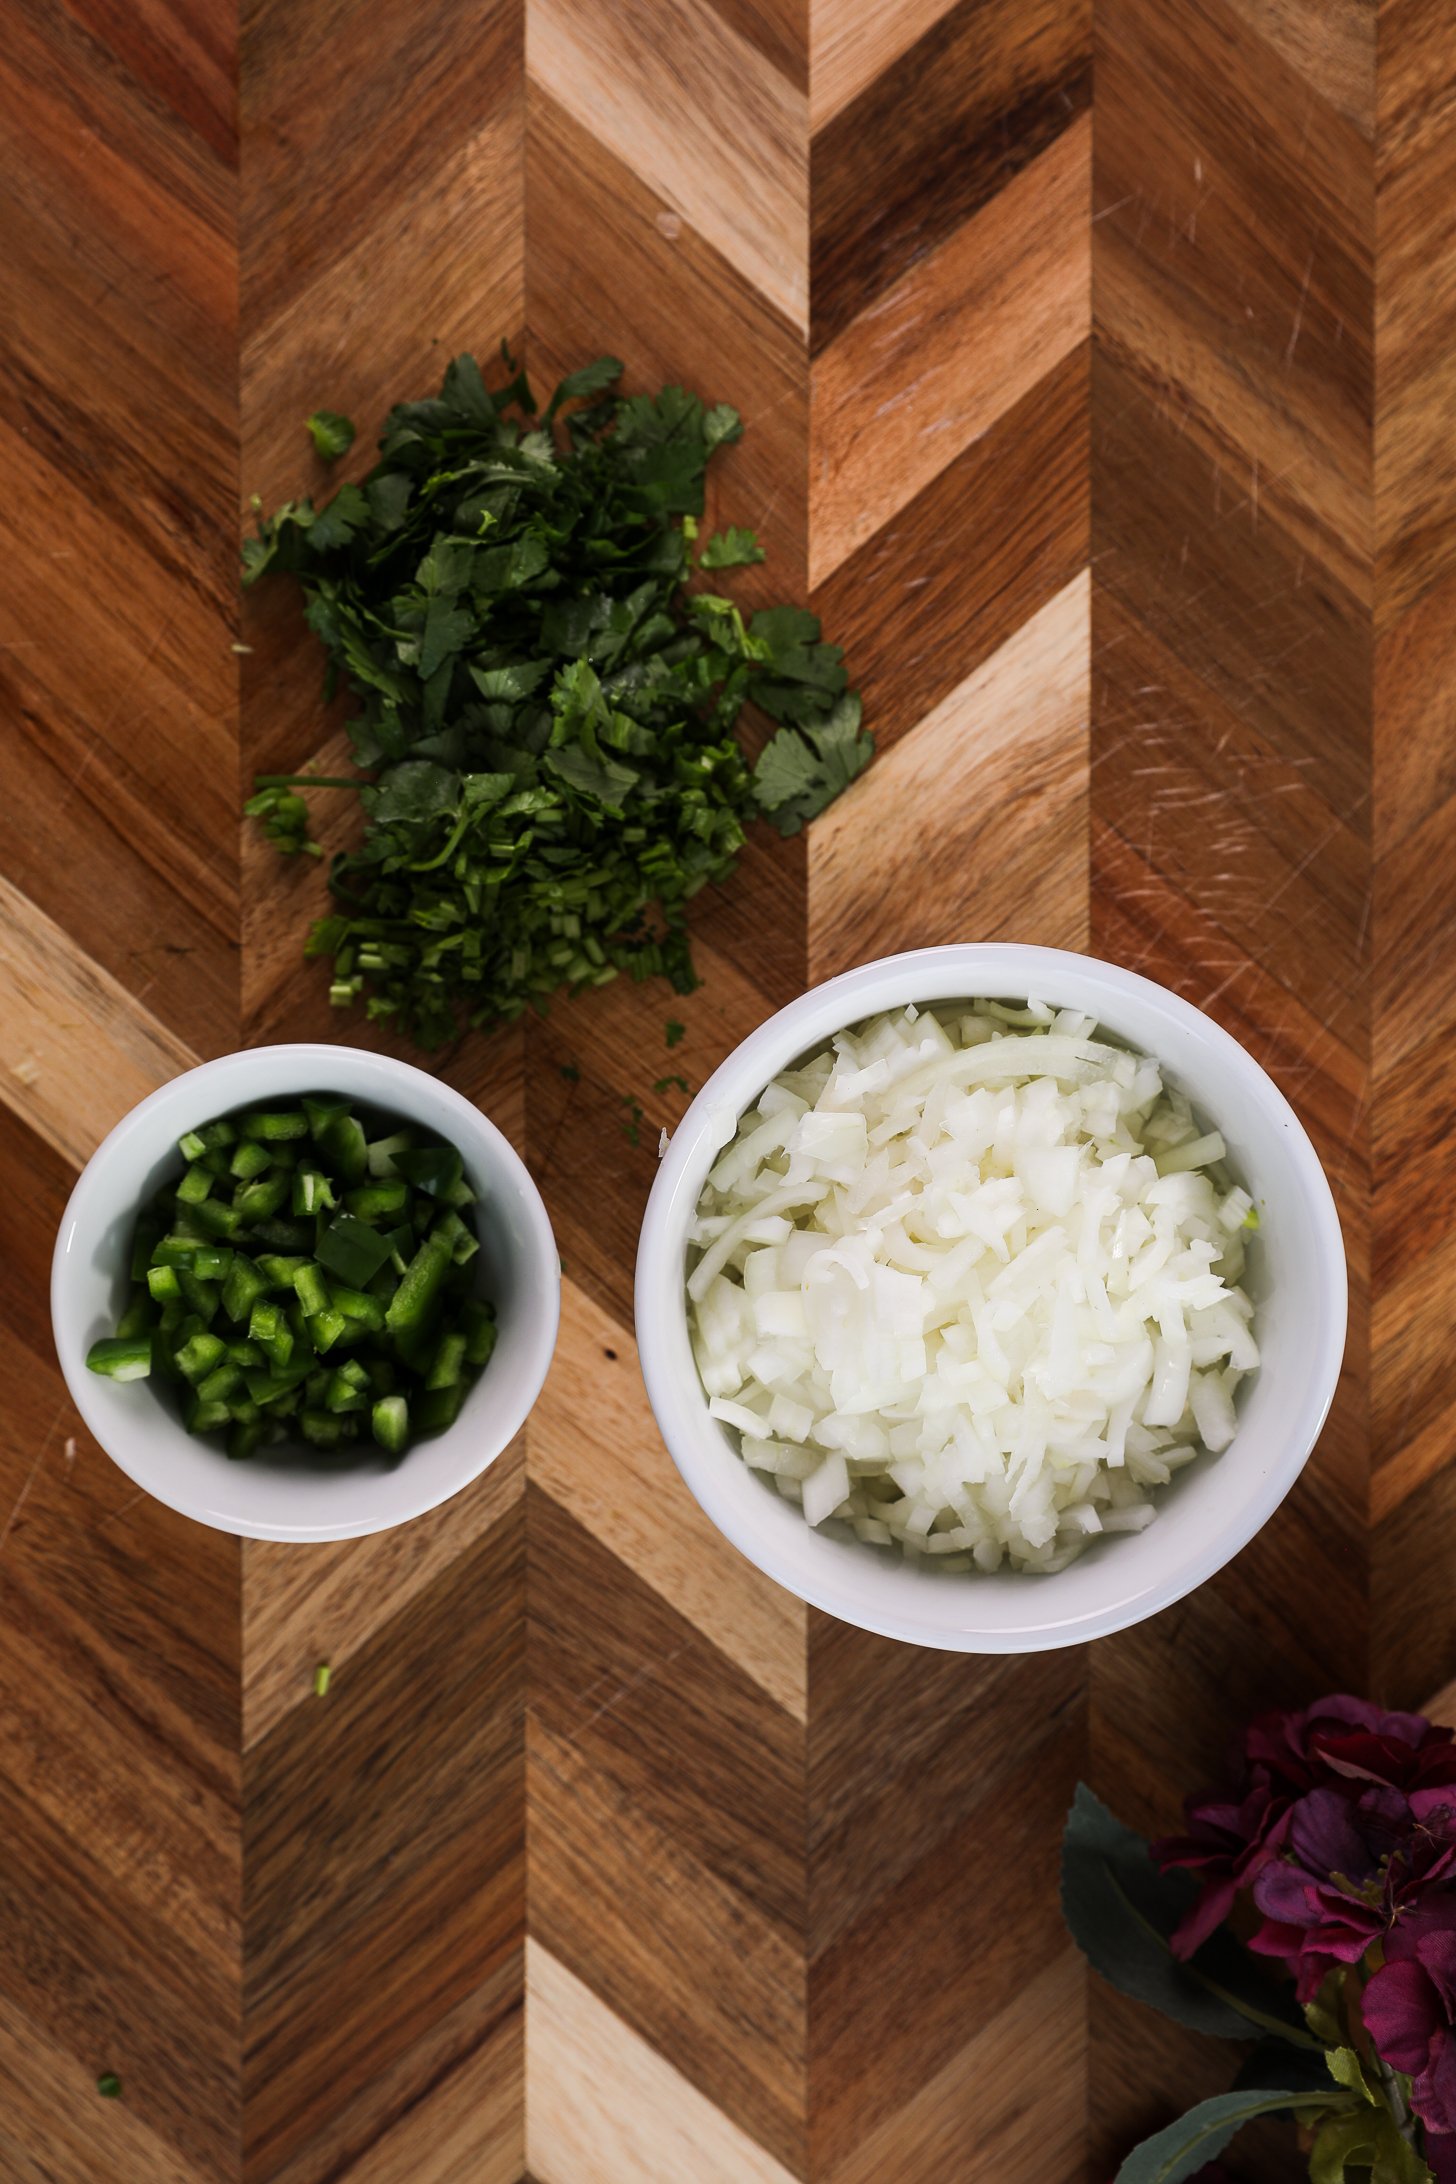 Wooden board featuring two ramekins of chopped onion and jalapeno, accompanied by chopped cilantro nearby.